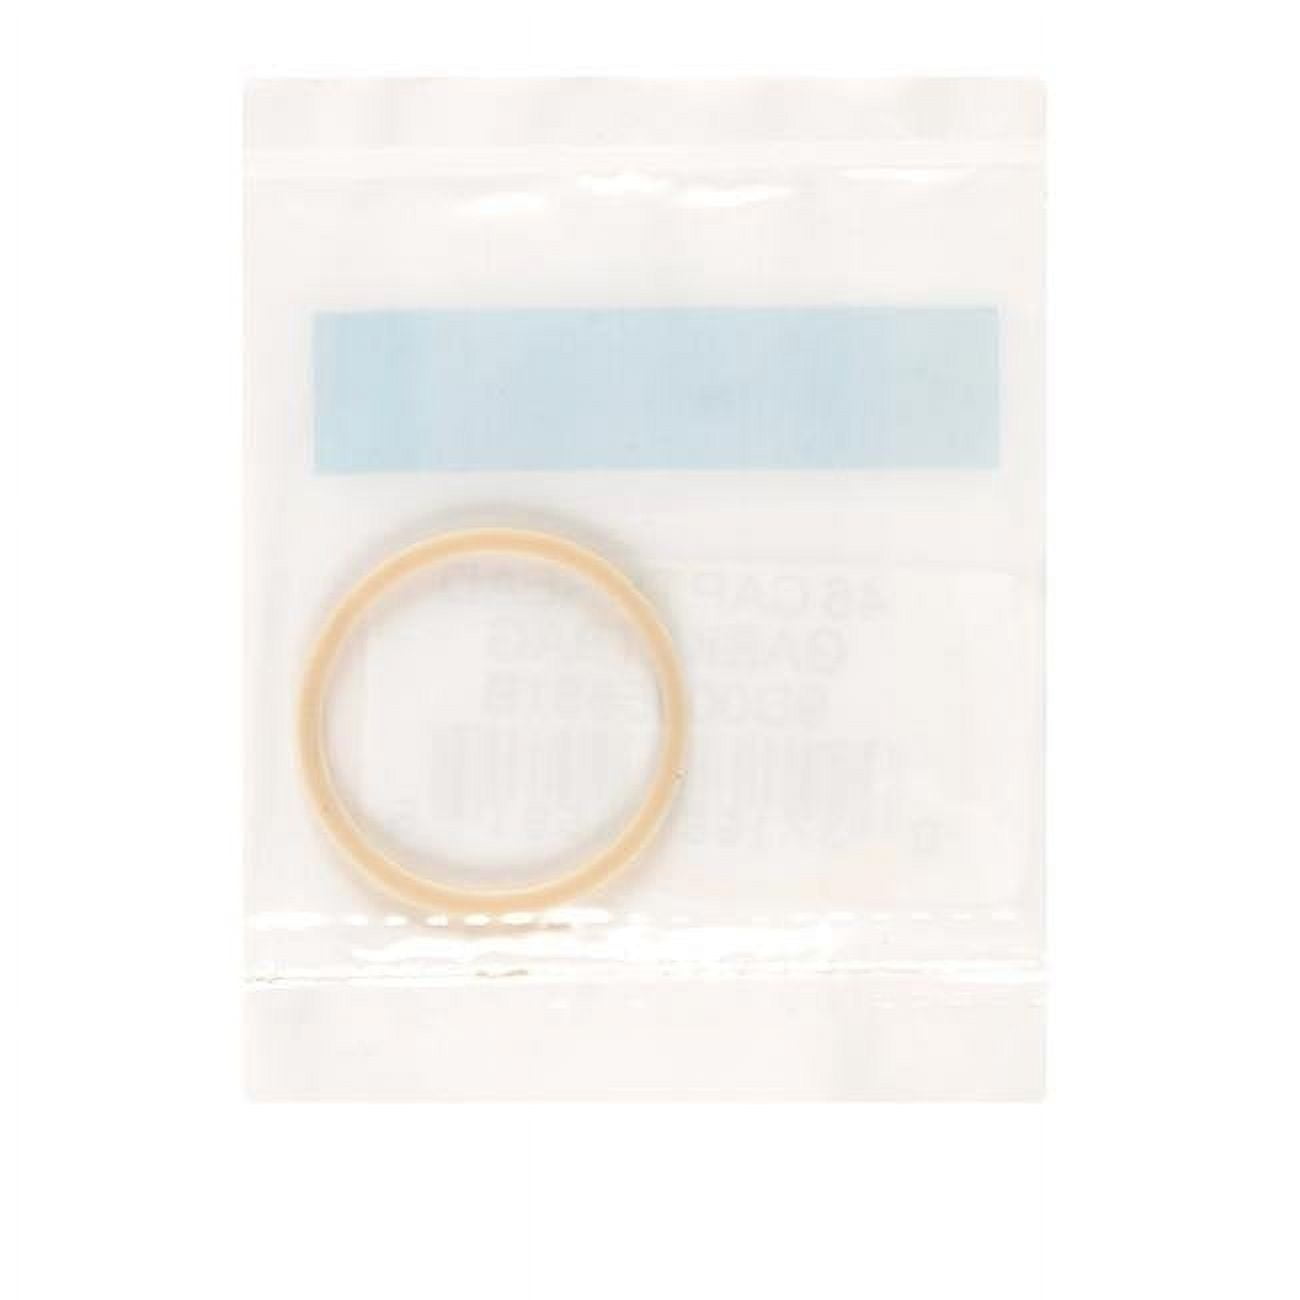 Picture of Danco 35581B No. 46 Cap Thread Gasket- pack of 5